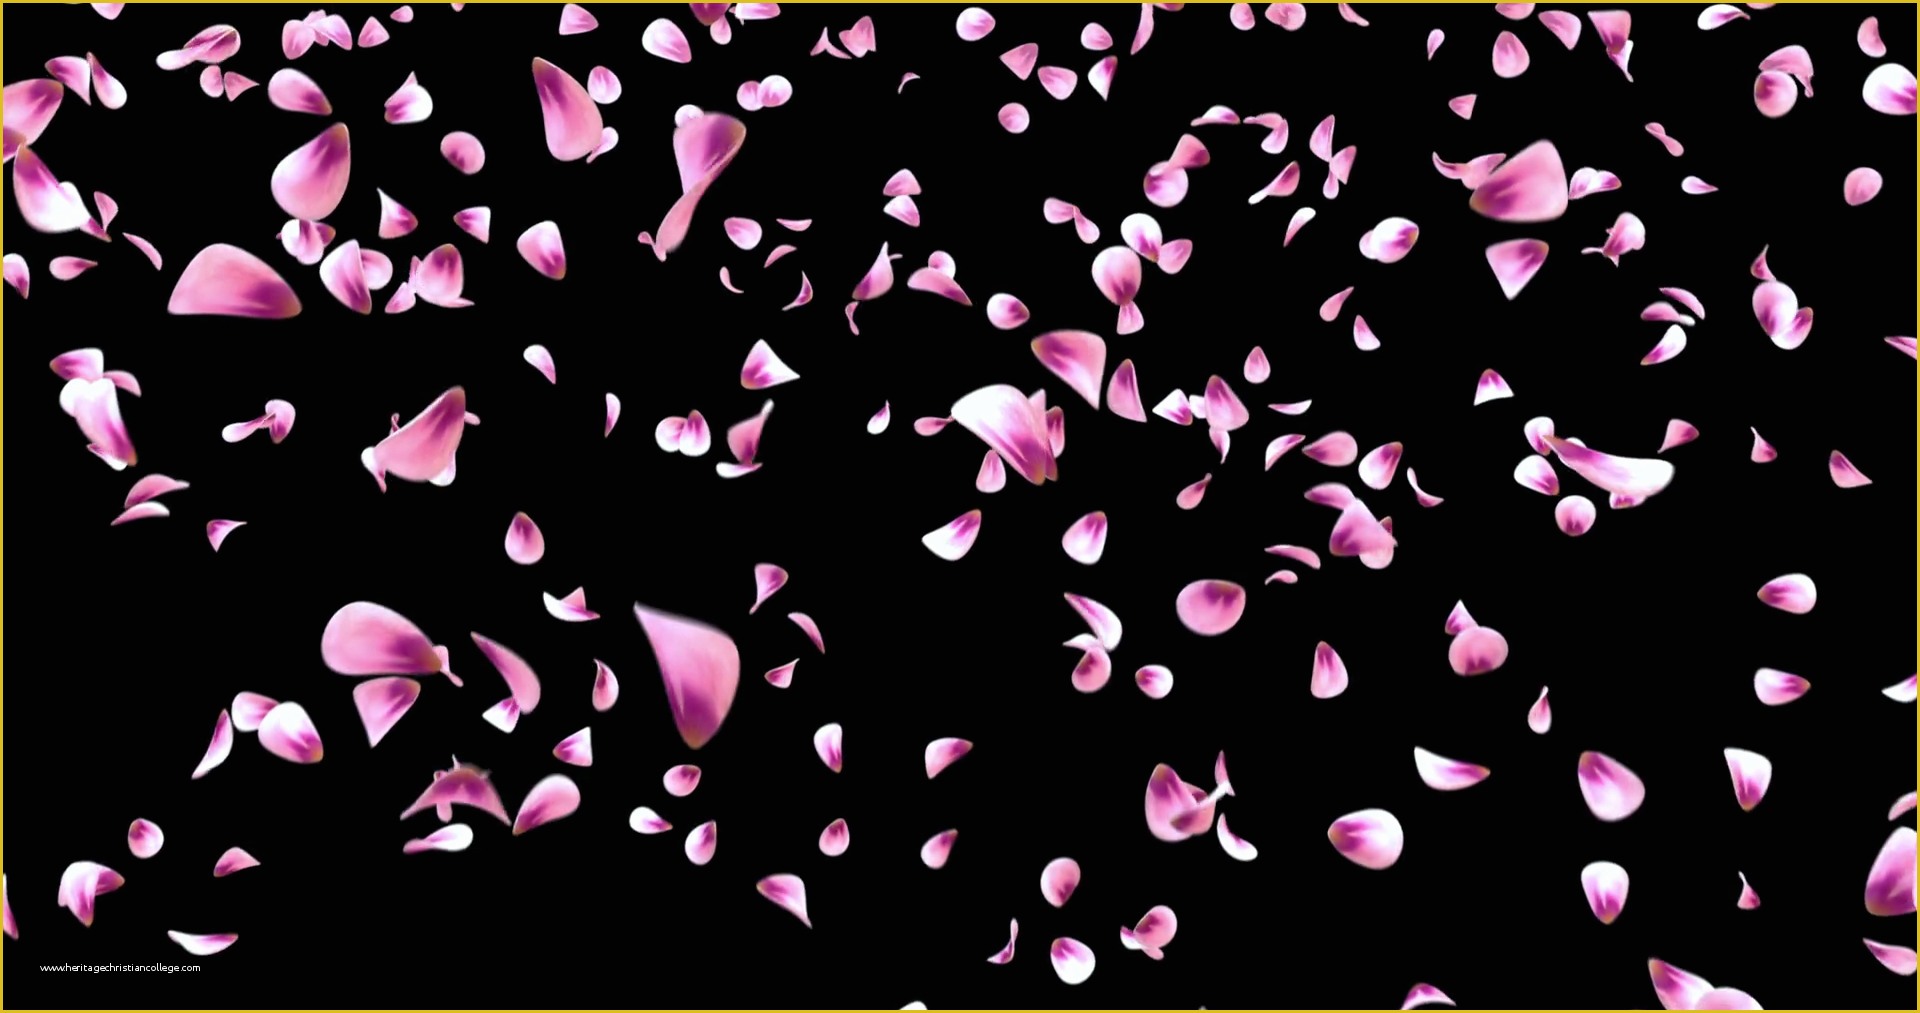 falling flower petals after effects project free download